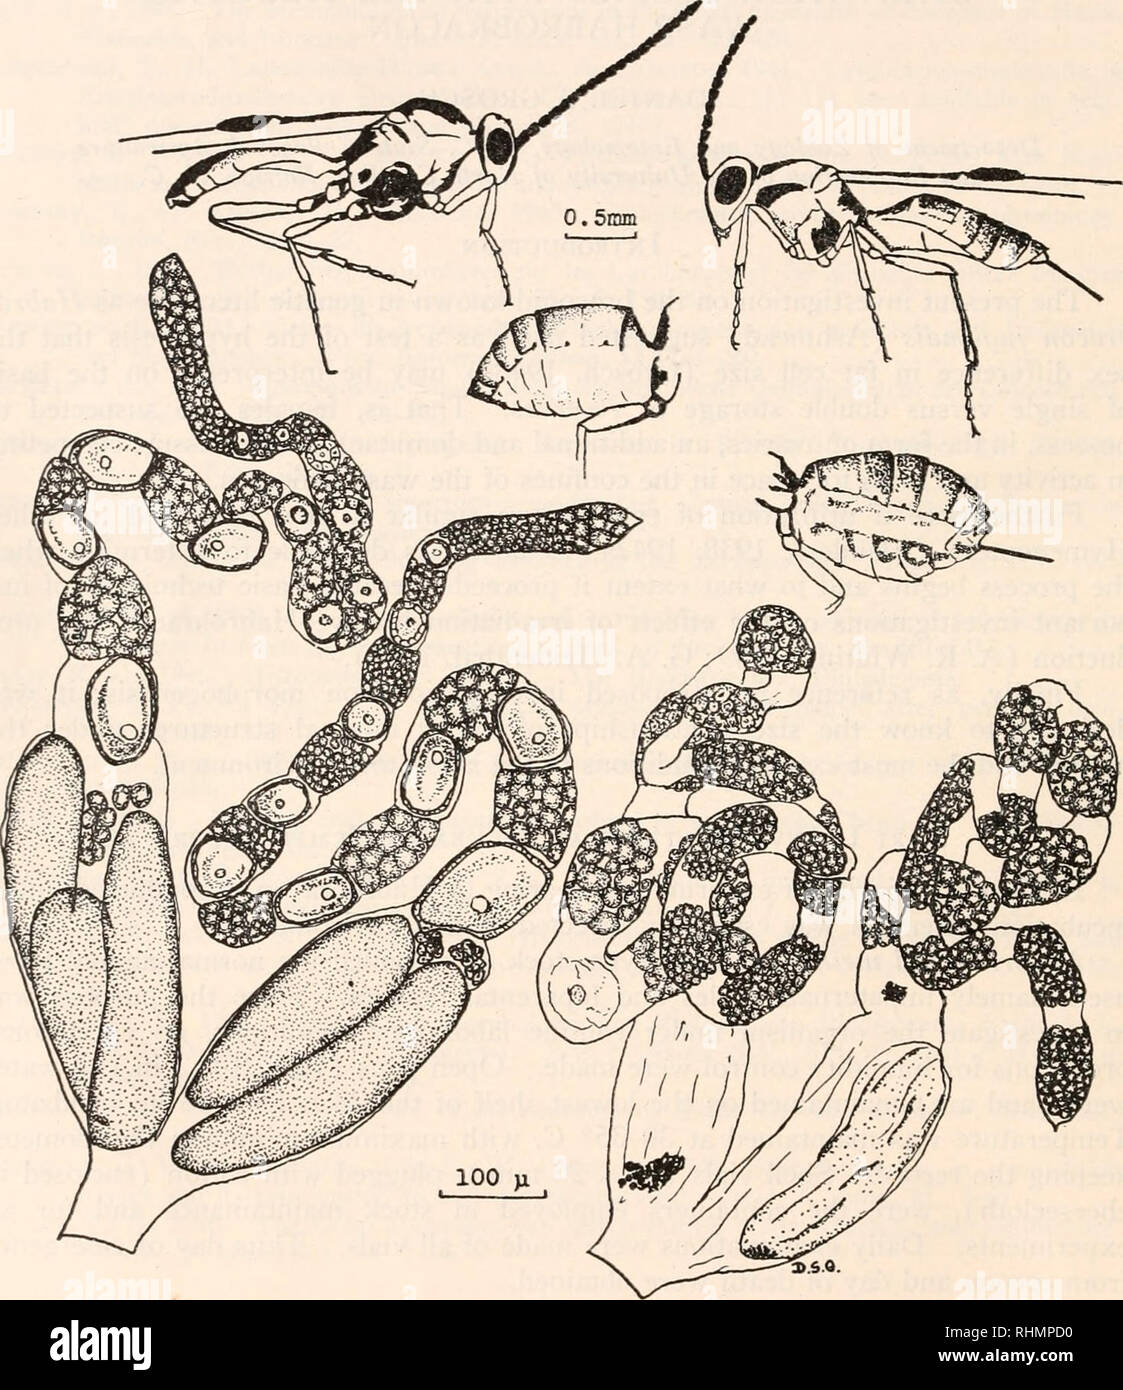 . The Biological bulletin. Biology; Zoology; Biology; Marine Biology. 66 DANIEL S. GROSCH For purposes of estimating the site of the major loss of substance during starvation, wasps were transected at the petiole and the weights of abdomens and weights of anterior regions were compared in freshly eclosed and in starved wasps.. FIGTKE 1. ^bove: Lateral views of a starved male (Left) and a starved female (Right) with abdomens or an unstarved male and female for comparison. The extreme dorsoventral flattening depicted can be seen in starved animals which are still quite active. It is interesting  Stock Photo